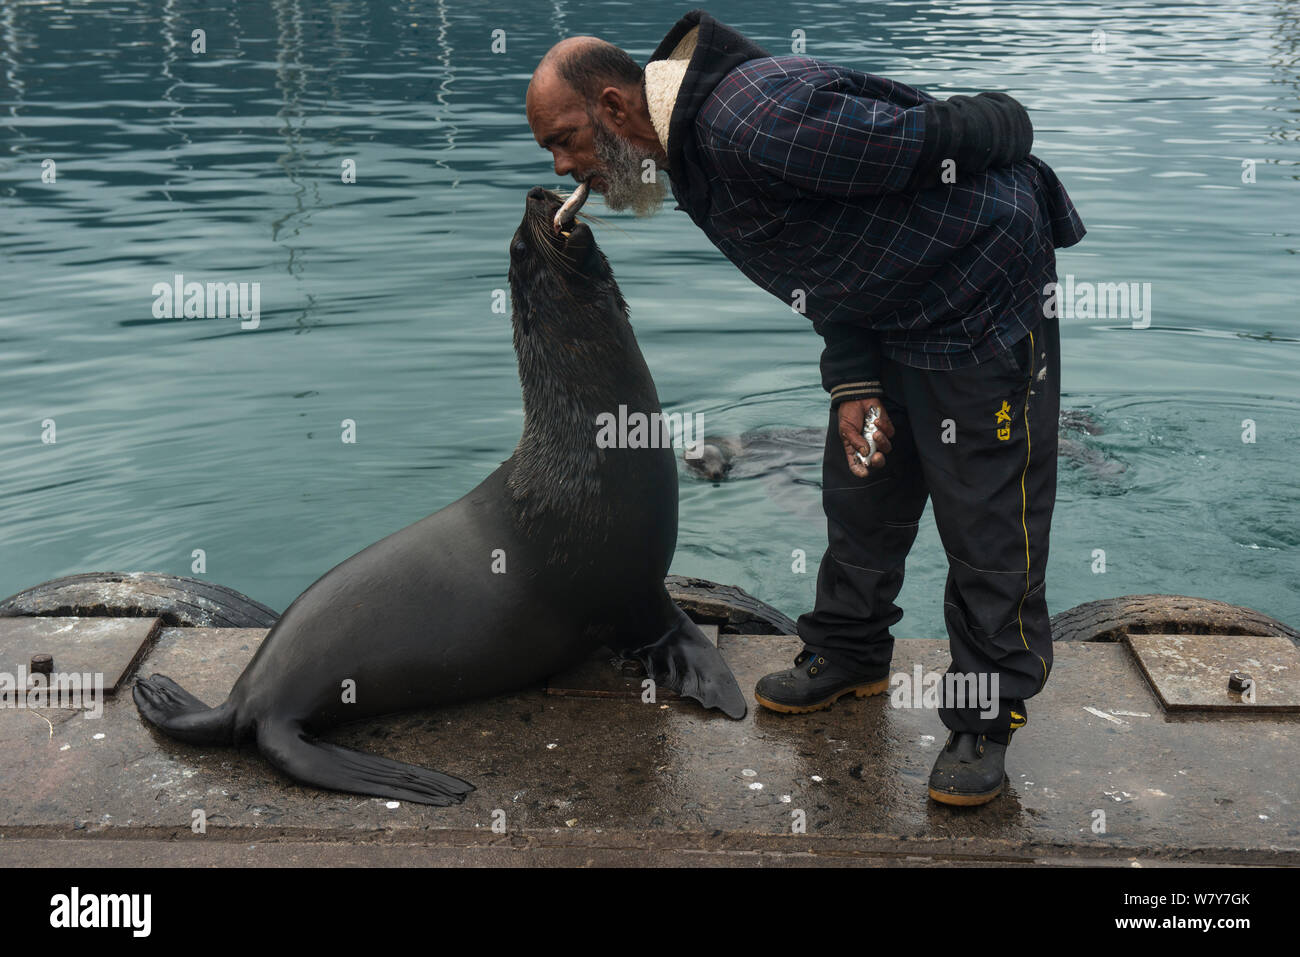 Cape fur seal (Arctocephalus pusillus) taking fish from the mouth of a fisherman. Hout Bay harbor, Western Cape, South Africa. Stock Photo